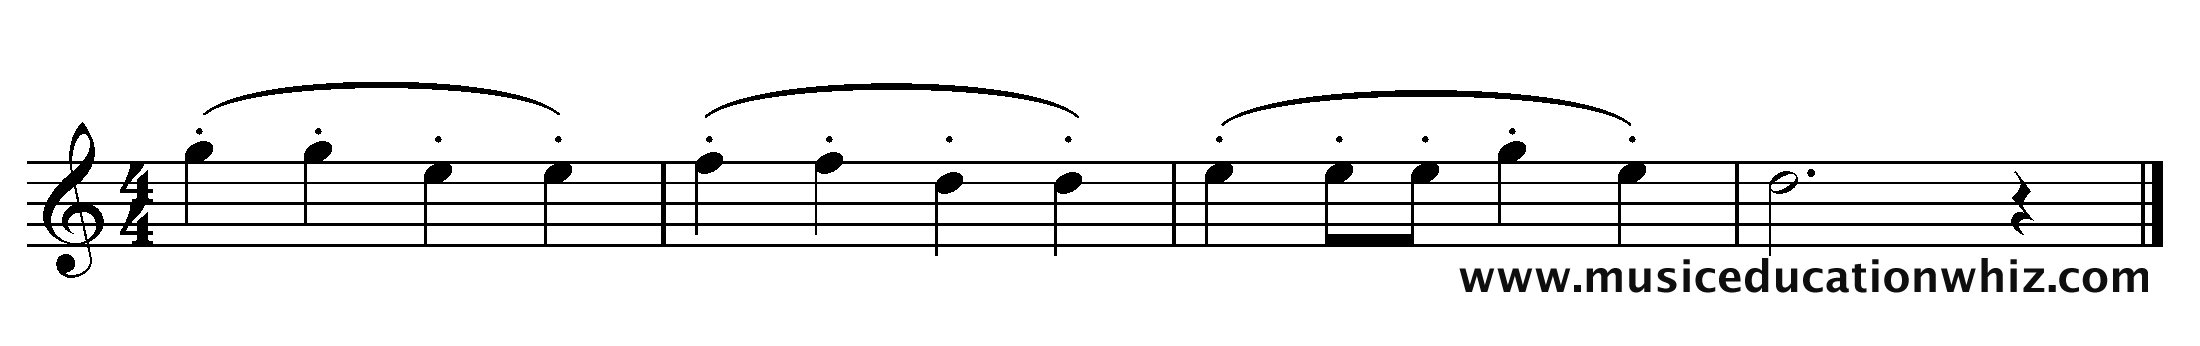 The music for 'Mary Mary Quite Contrary' with mezzo staccato markings (dots).